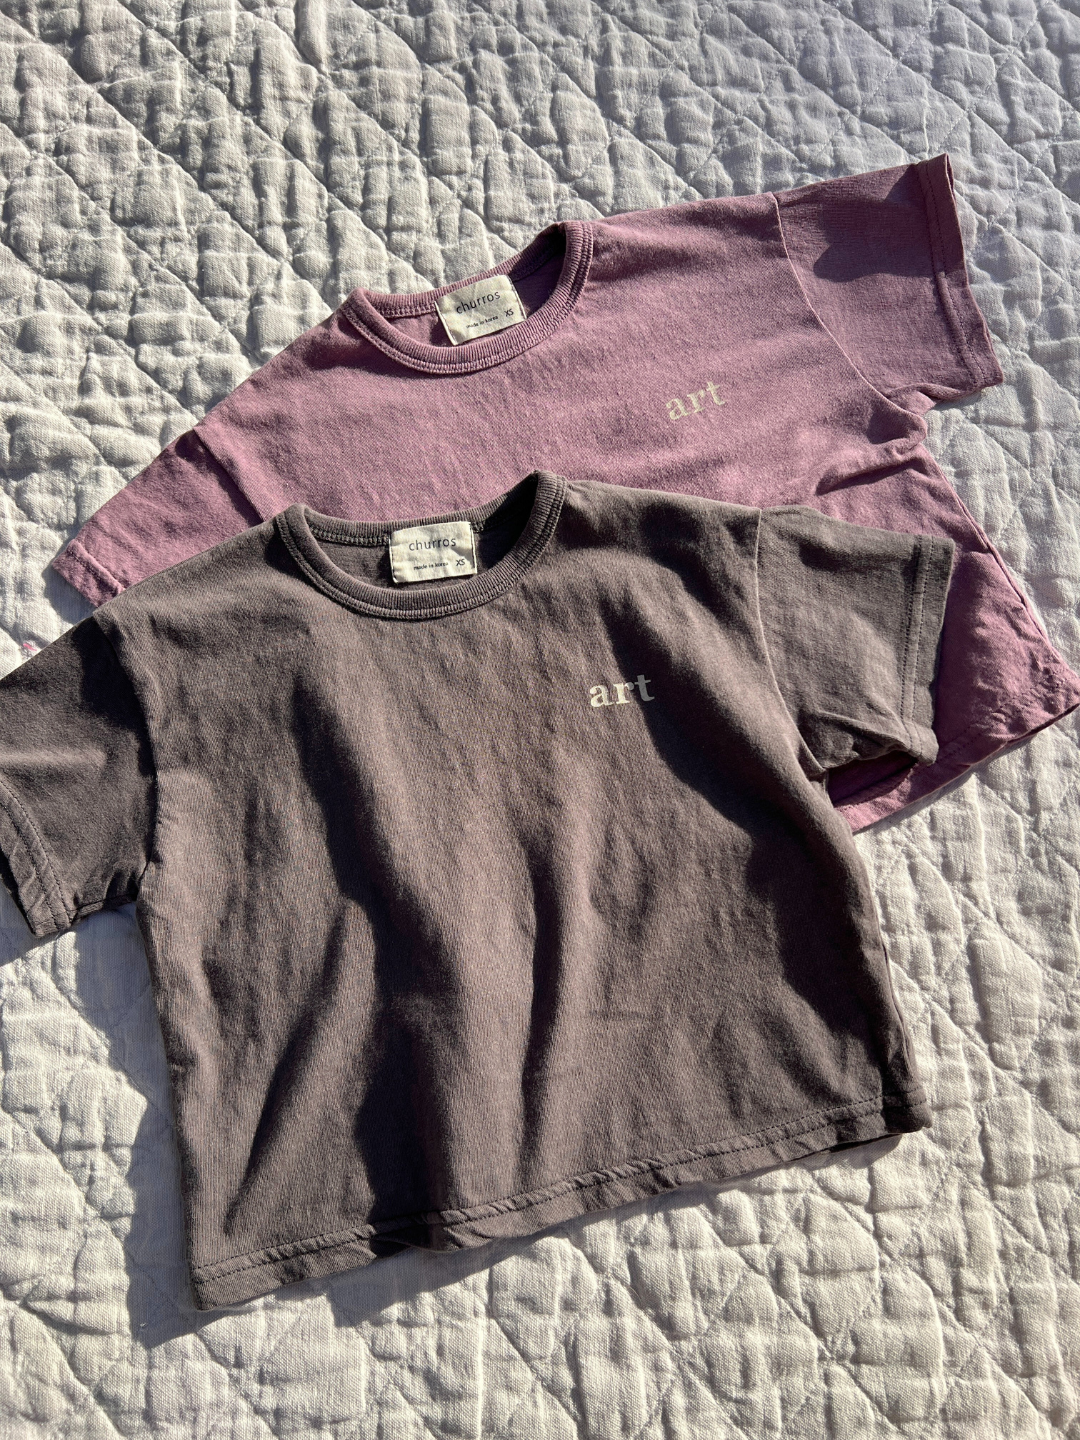 Charcoal | Two kids' Studio tees laid flat on a quilt in the sun